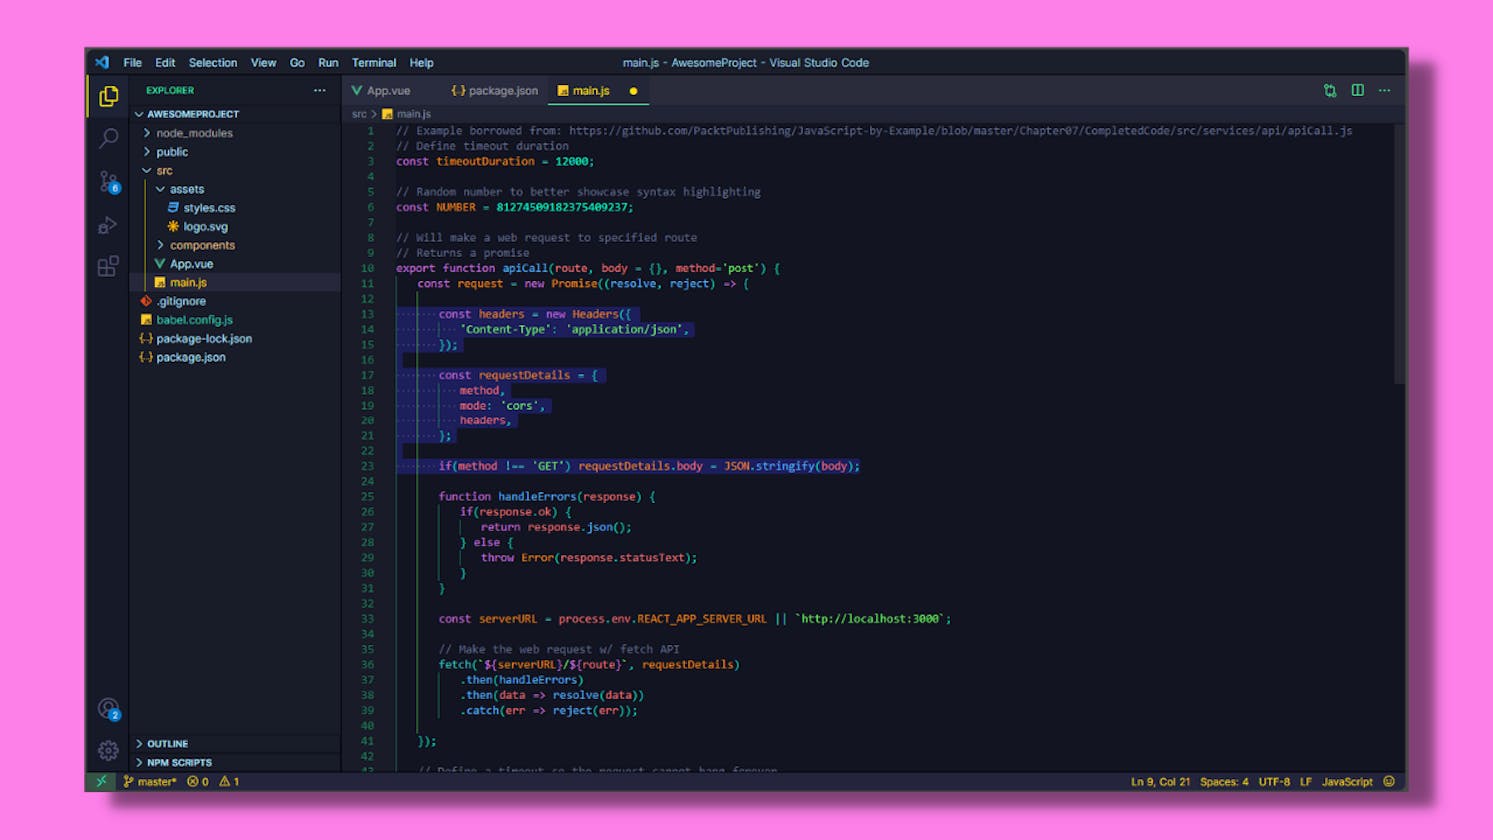 Create and publish your own VScode theme